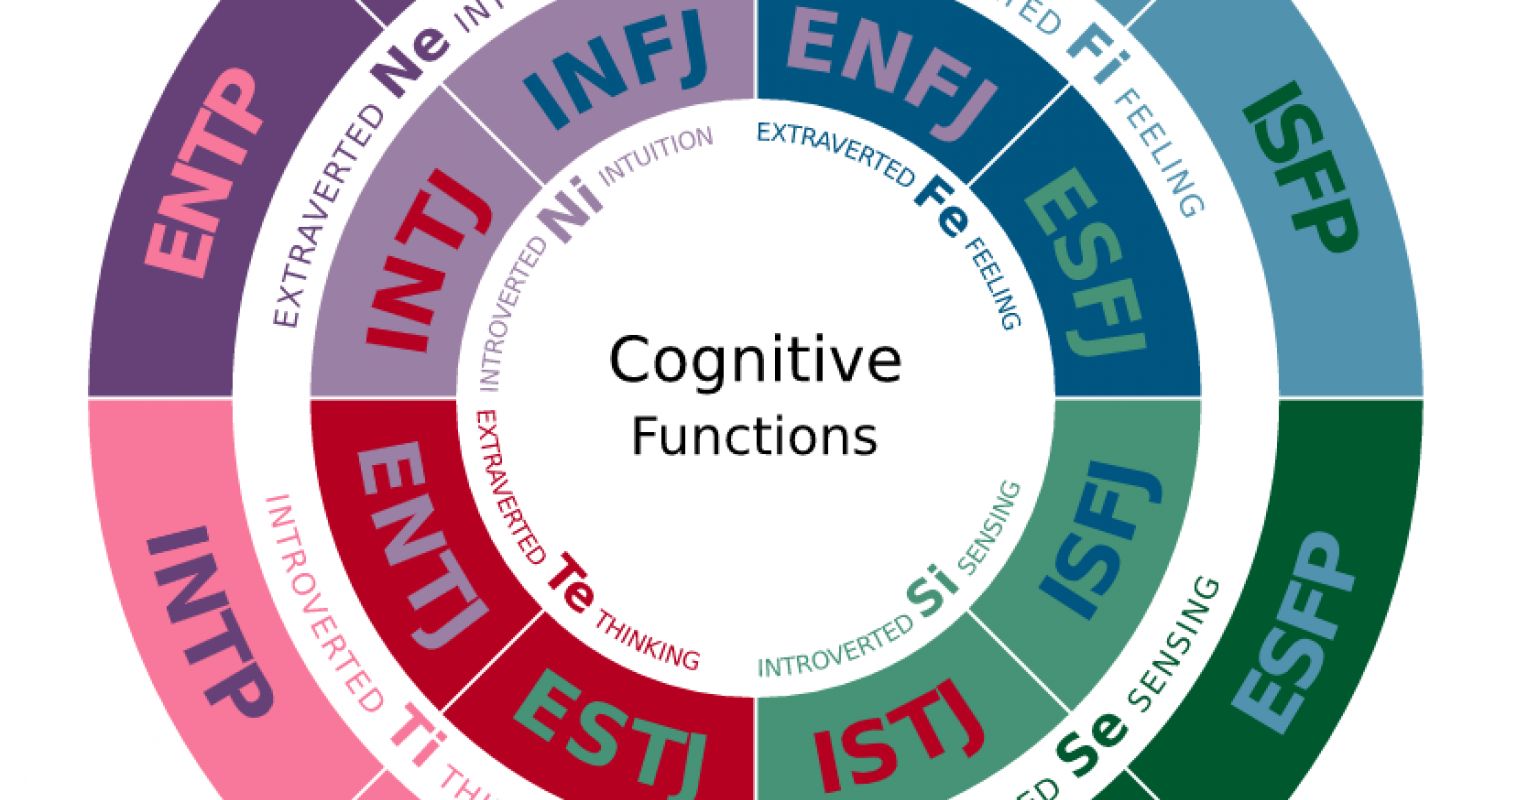 two-reasons-personality-tests-like-myers-briggs-could-be-harmful